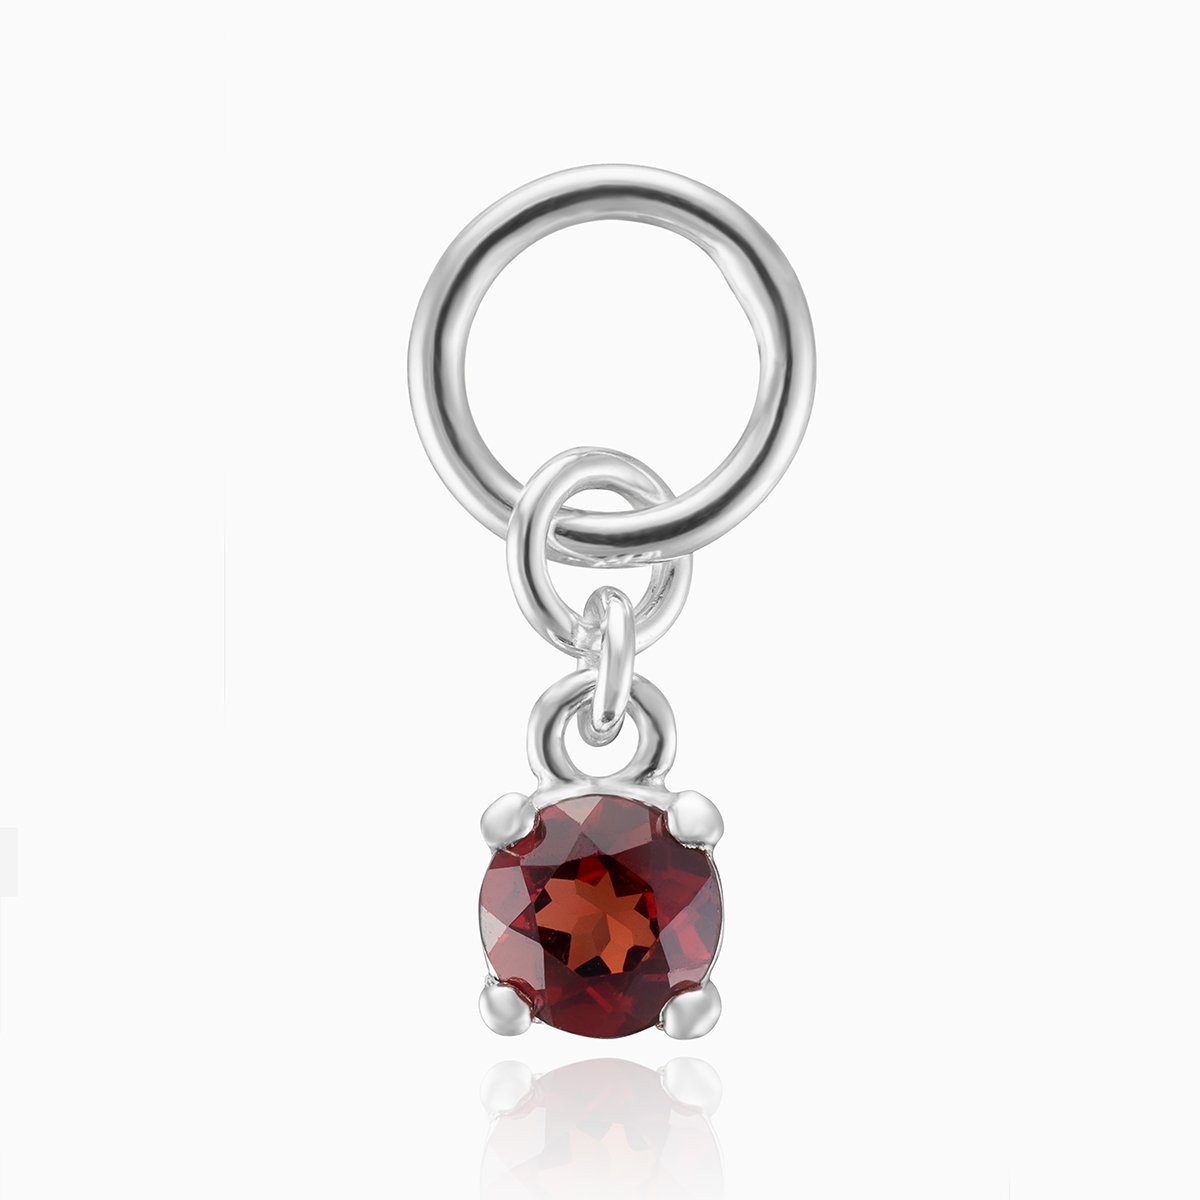 Product title: Red CZ Silver Charm, product type: Charm